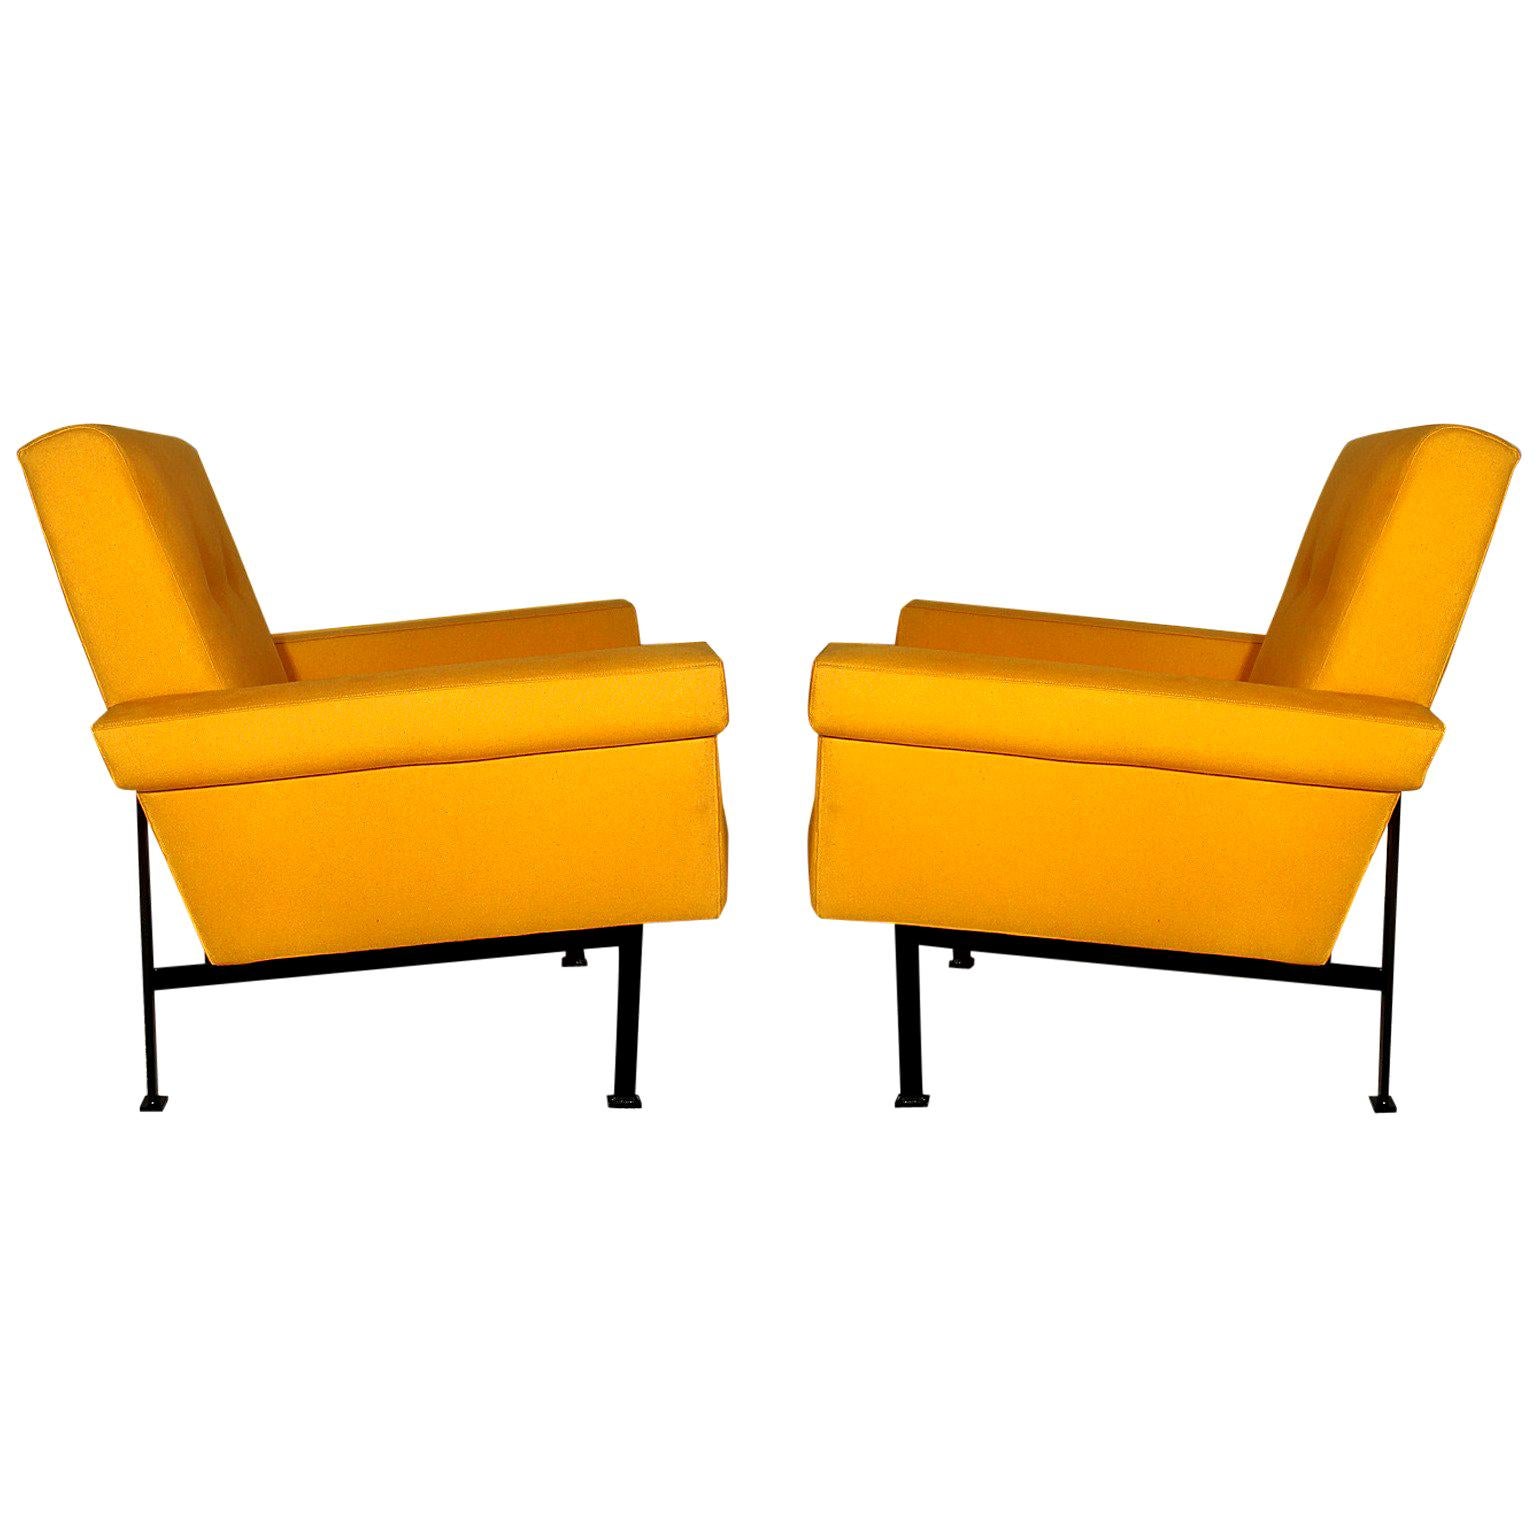 1960s Pair of Cubist Armchairs, Wrought Iron, Yellow Cotton Upholstery, Italy